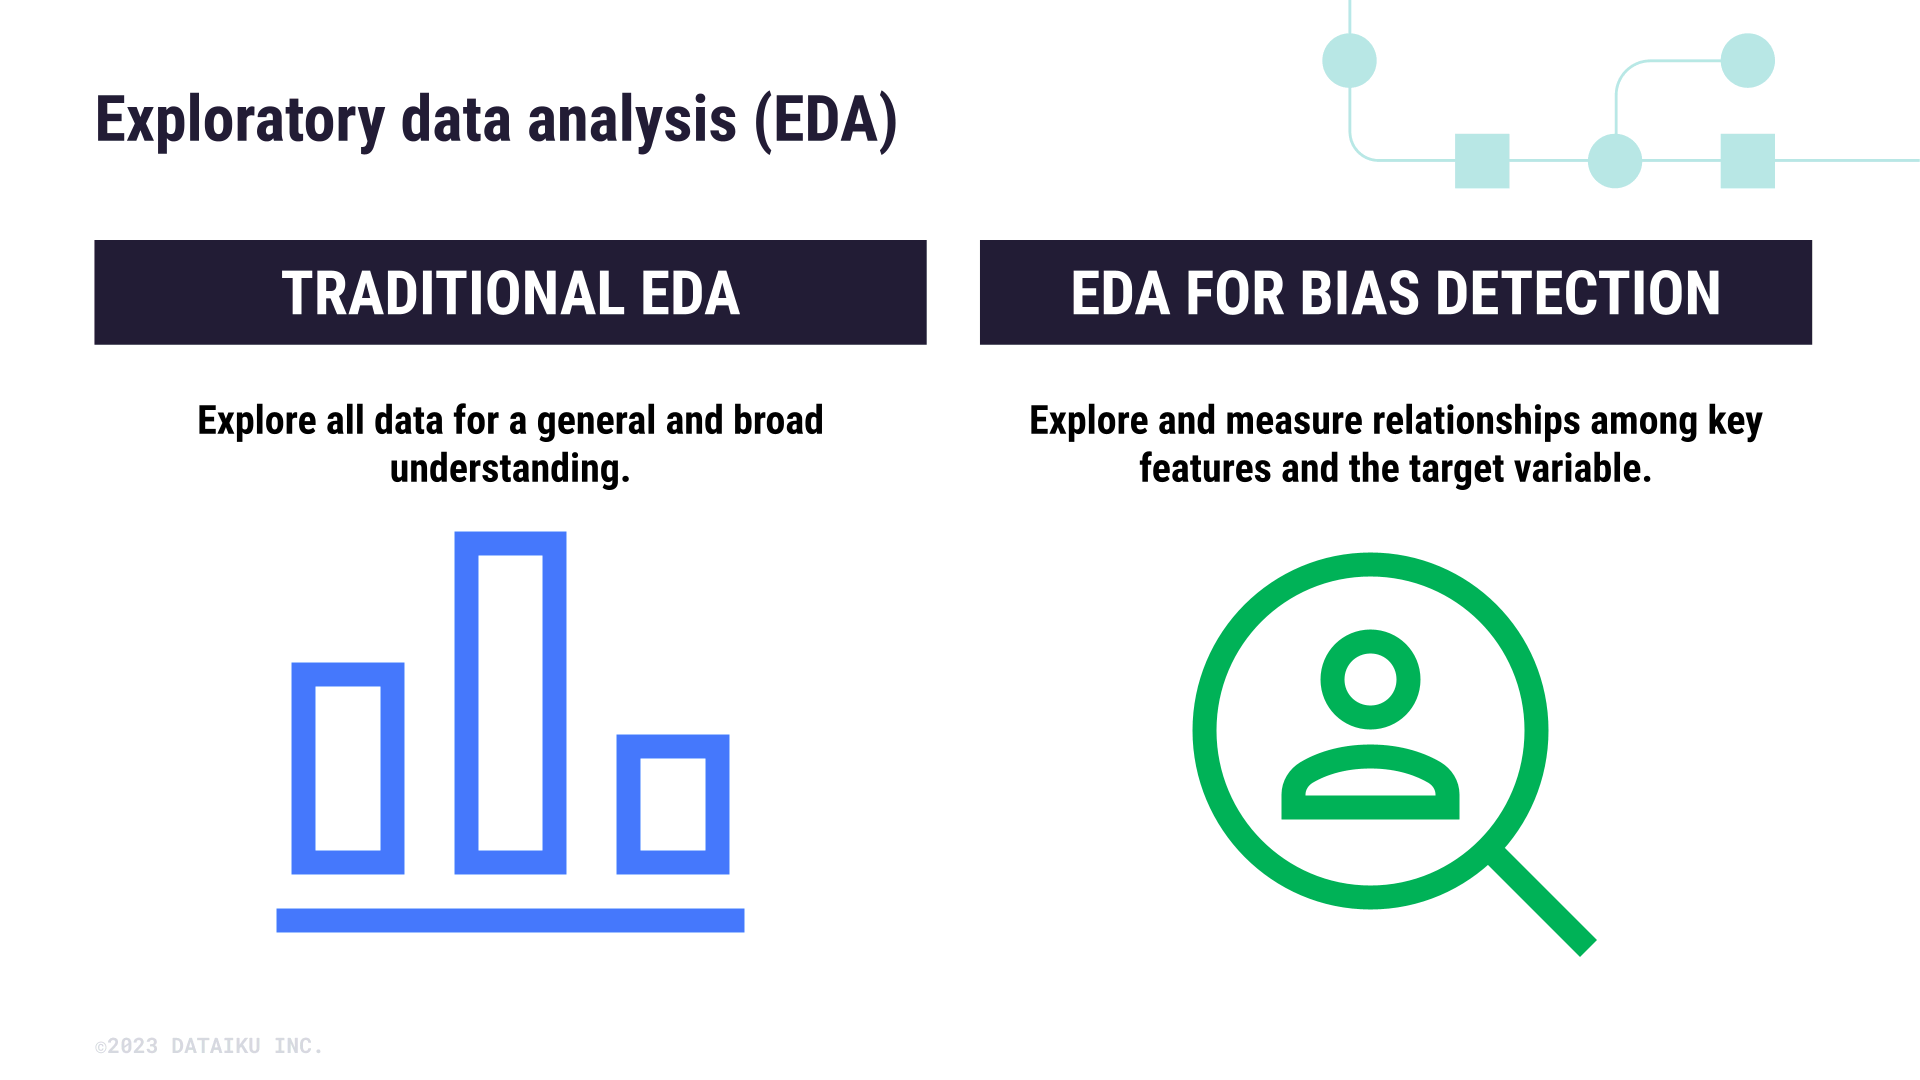 Differentiation between traditional EDA and EDA for bias detection.